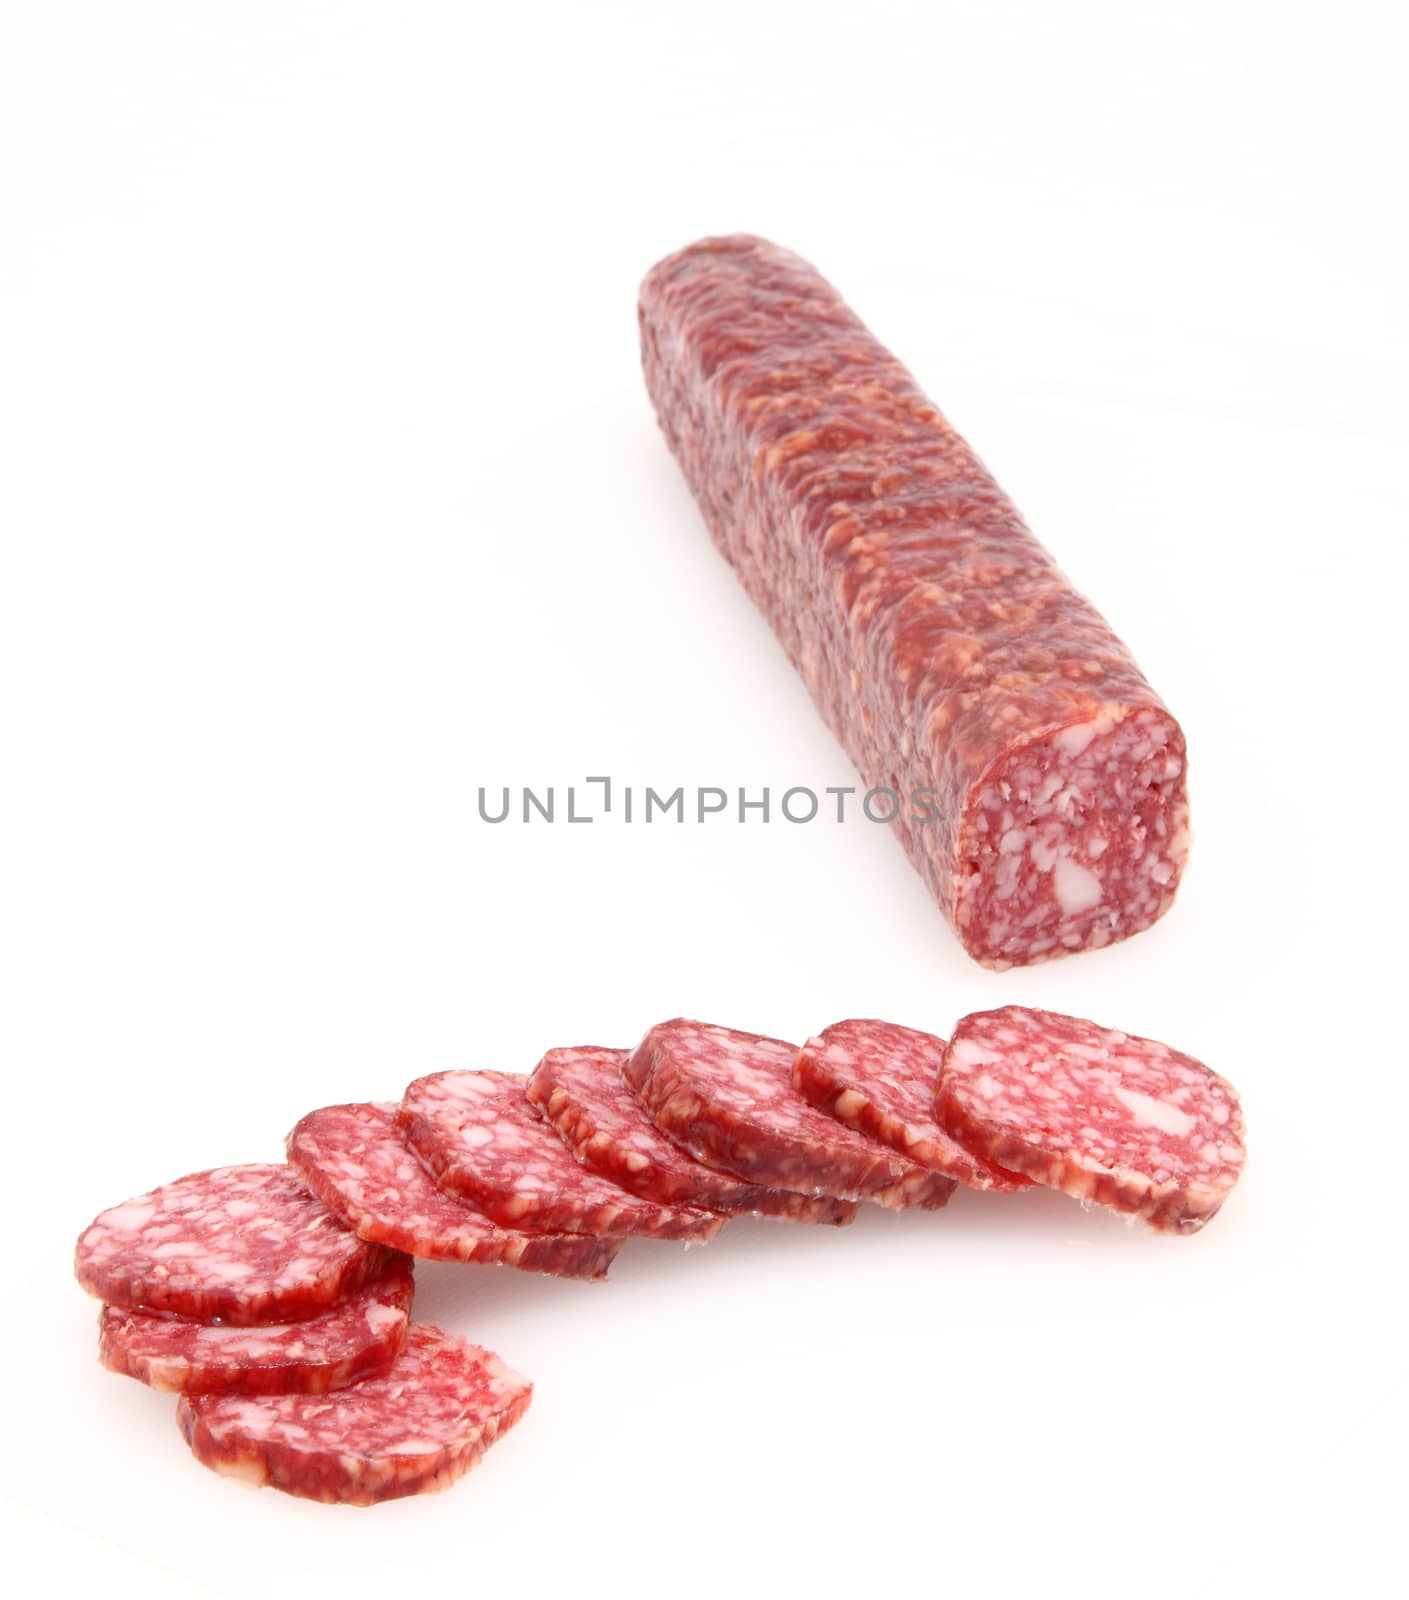 sausage  isolated on white background